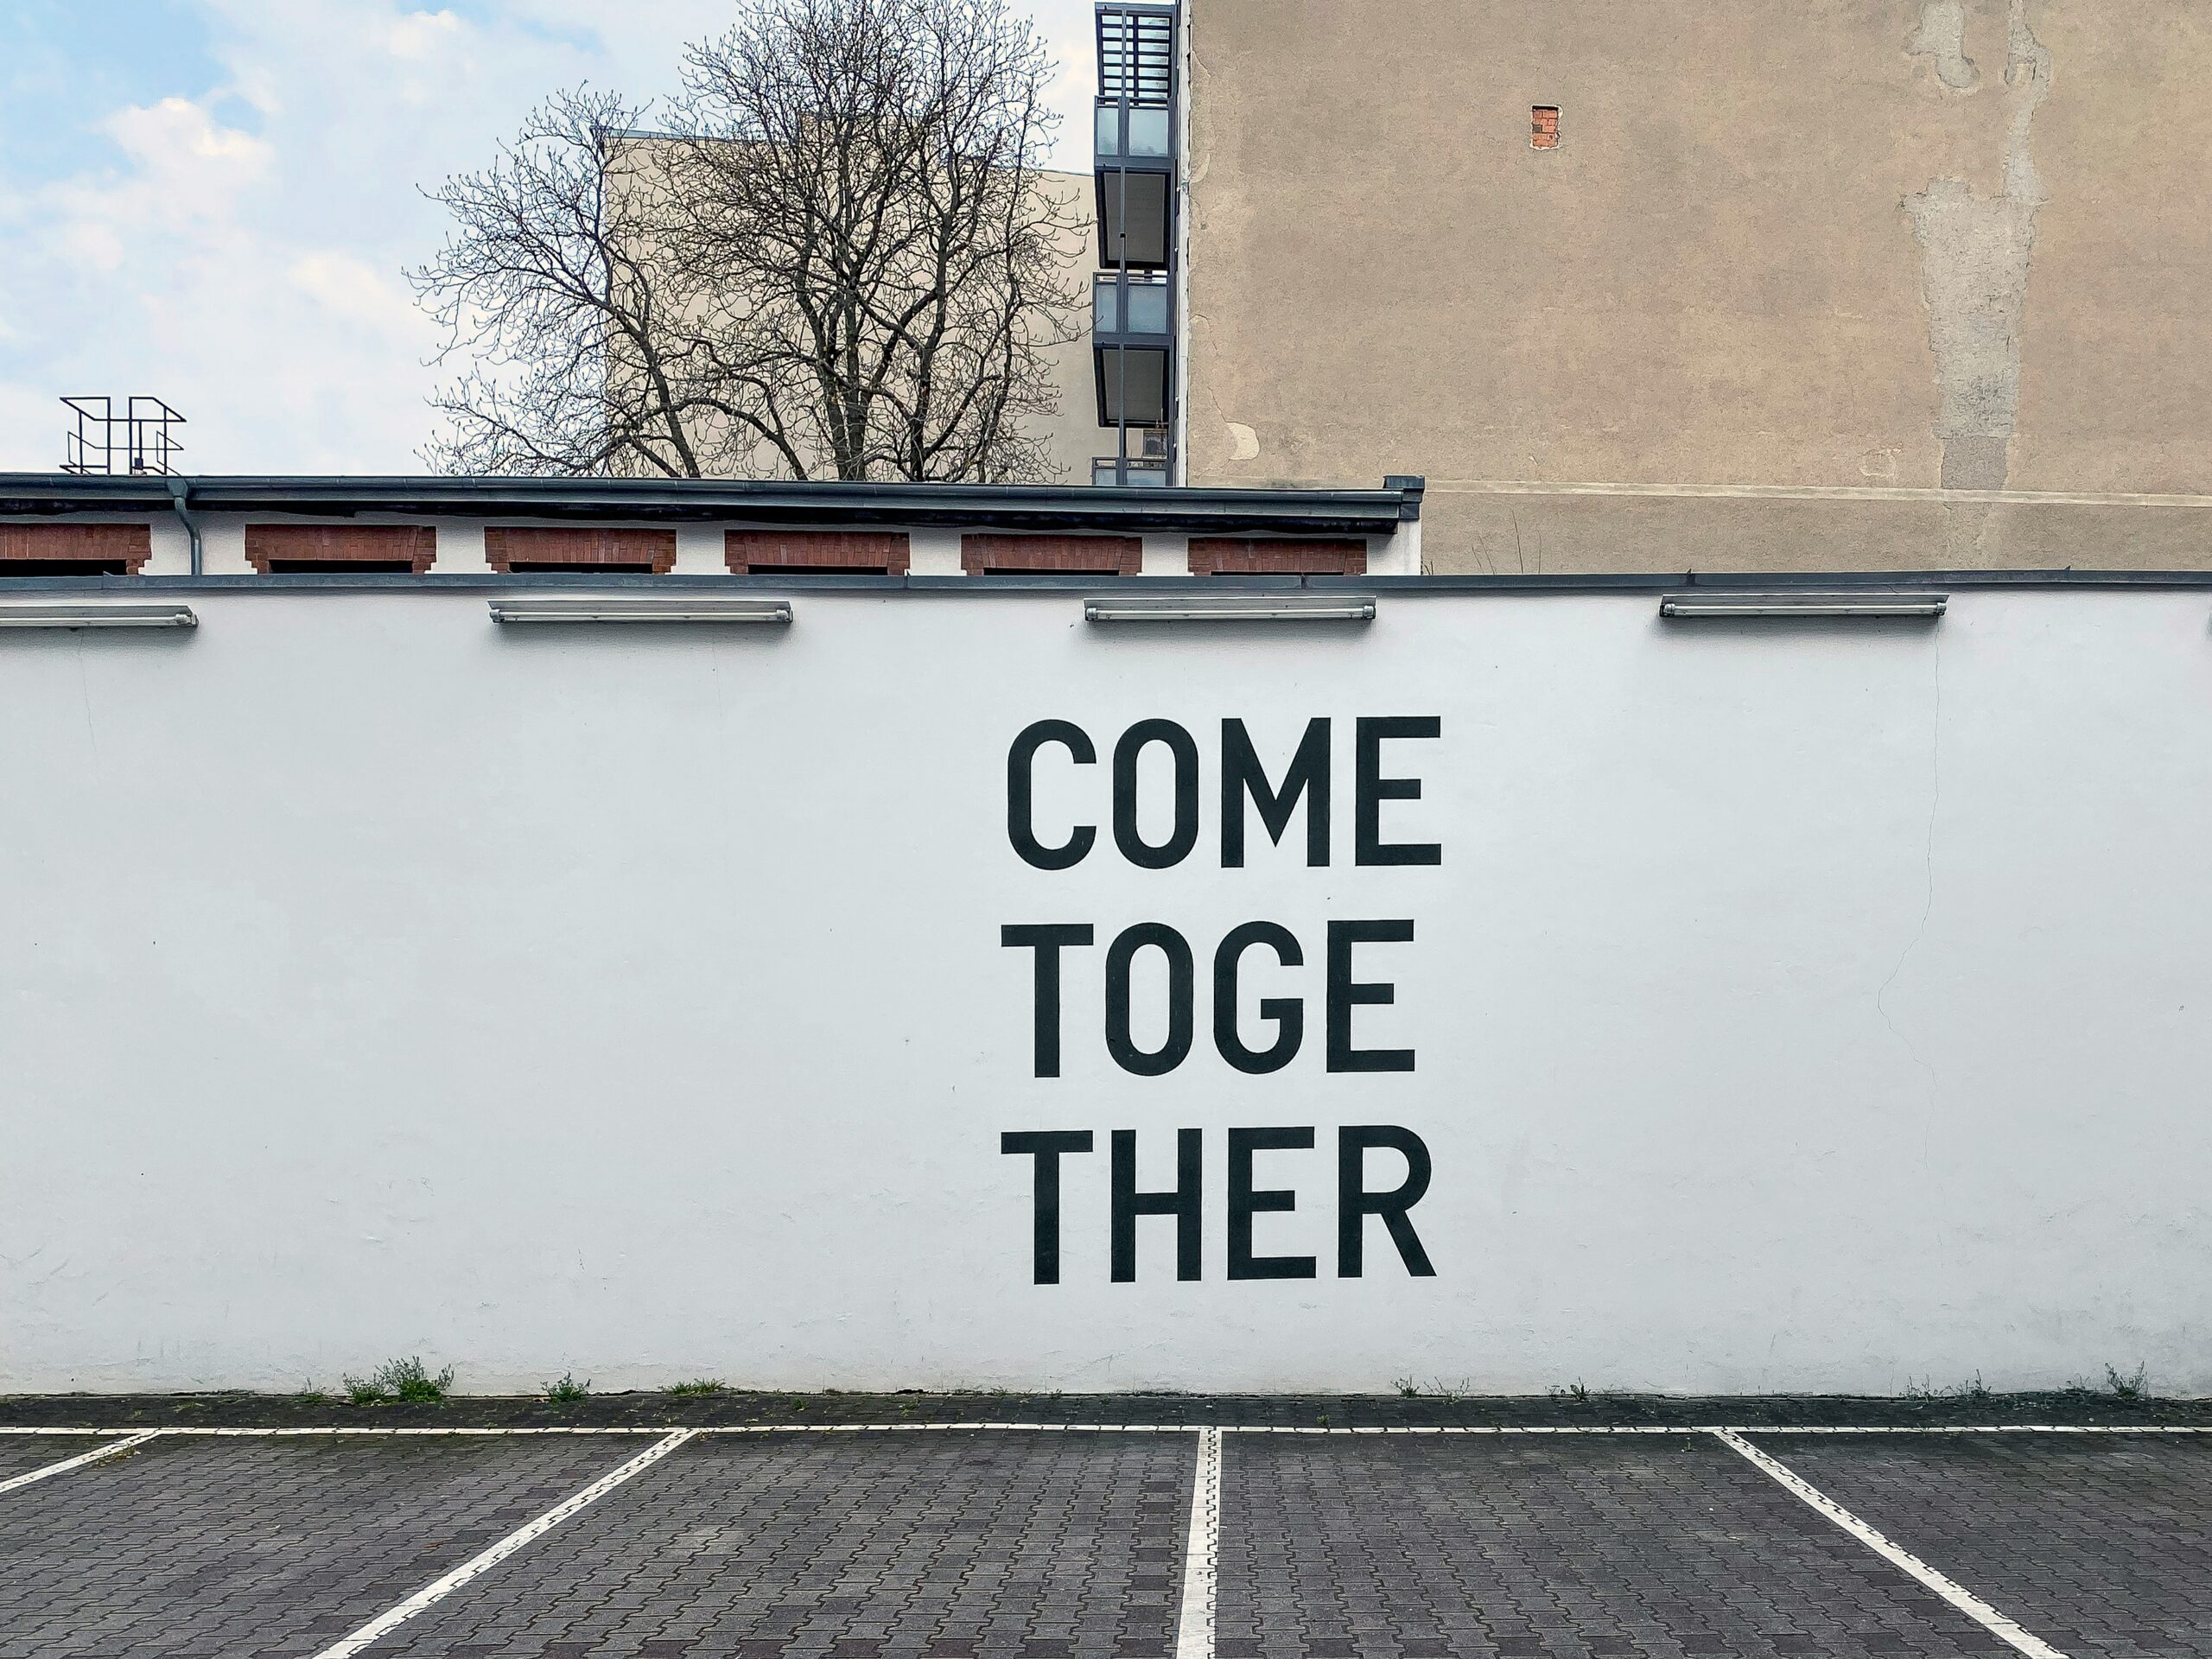 Image of "COME TOGETHER" mural for Blog post about how to make your brand more human